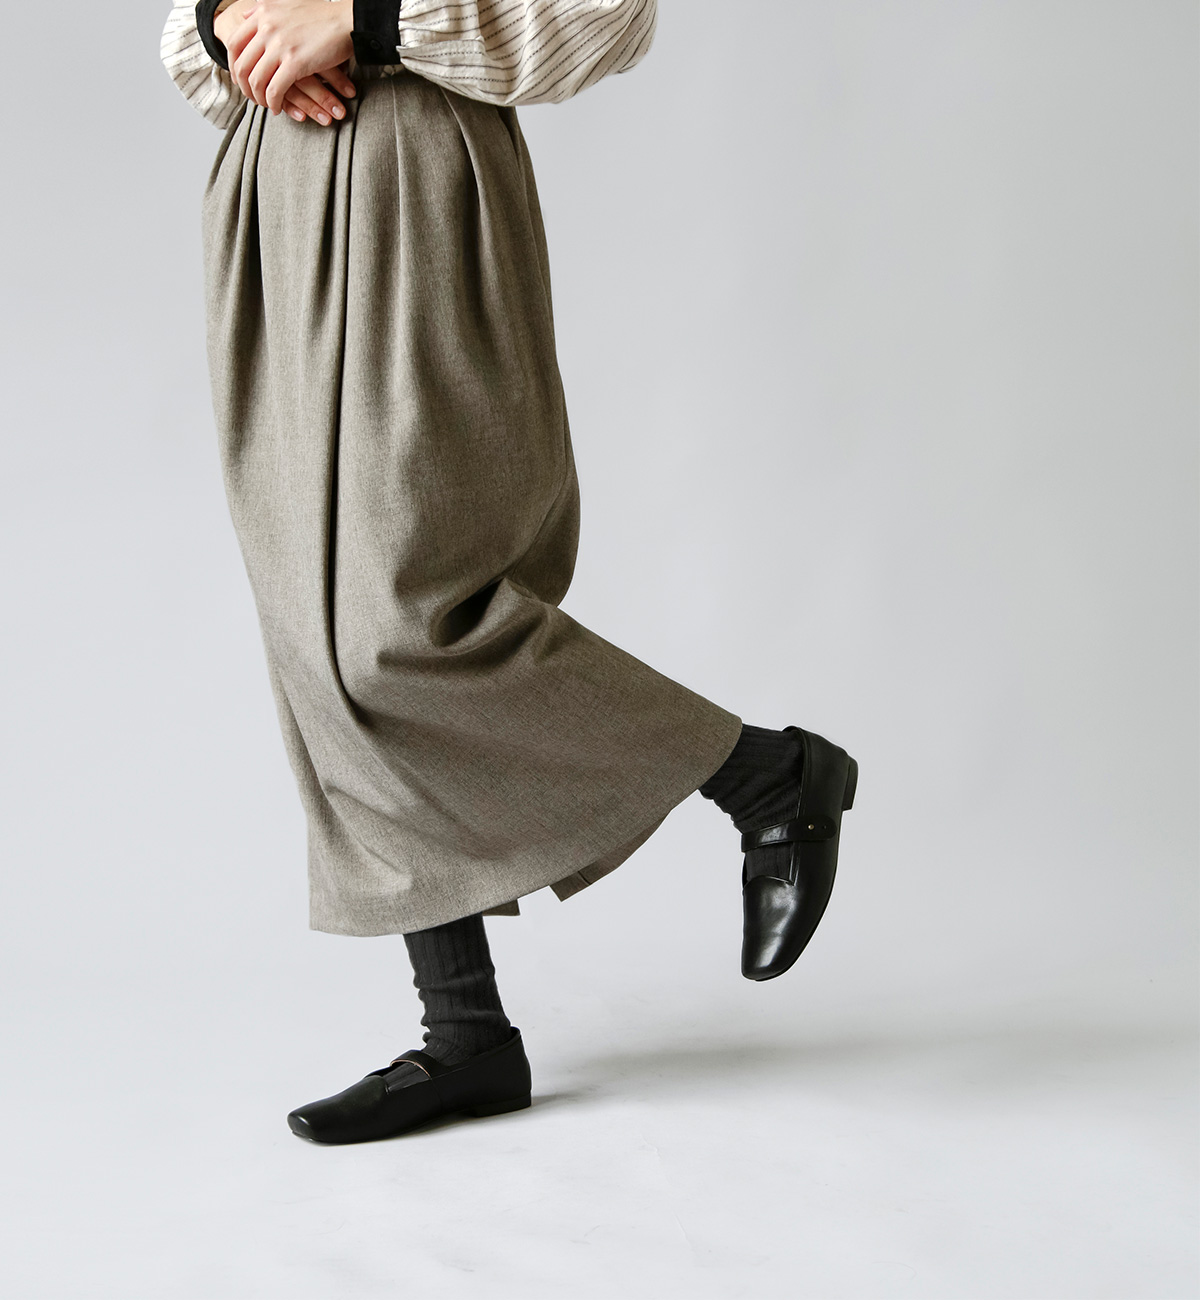 R & D.M.Co-(I[h}Ye[[)[YtBbg^Cc"LOOSE FIT TIGHTS" 3817